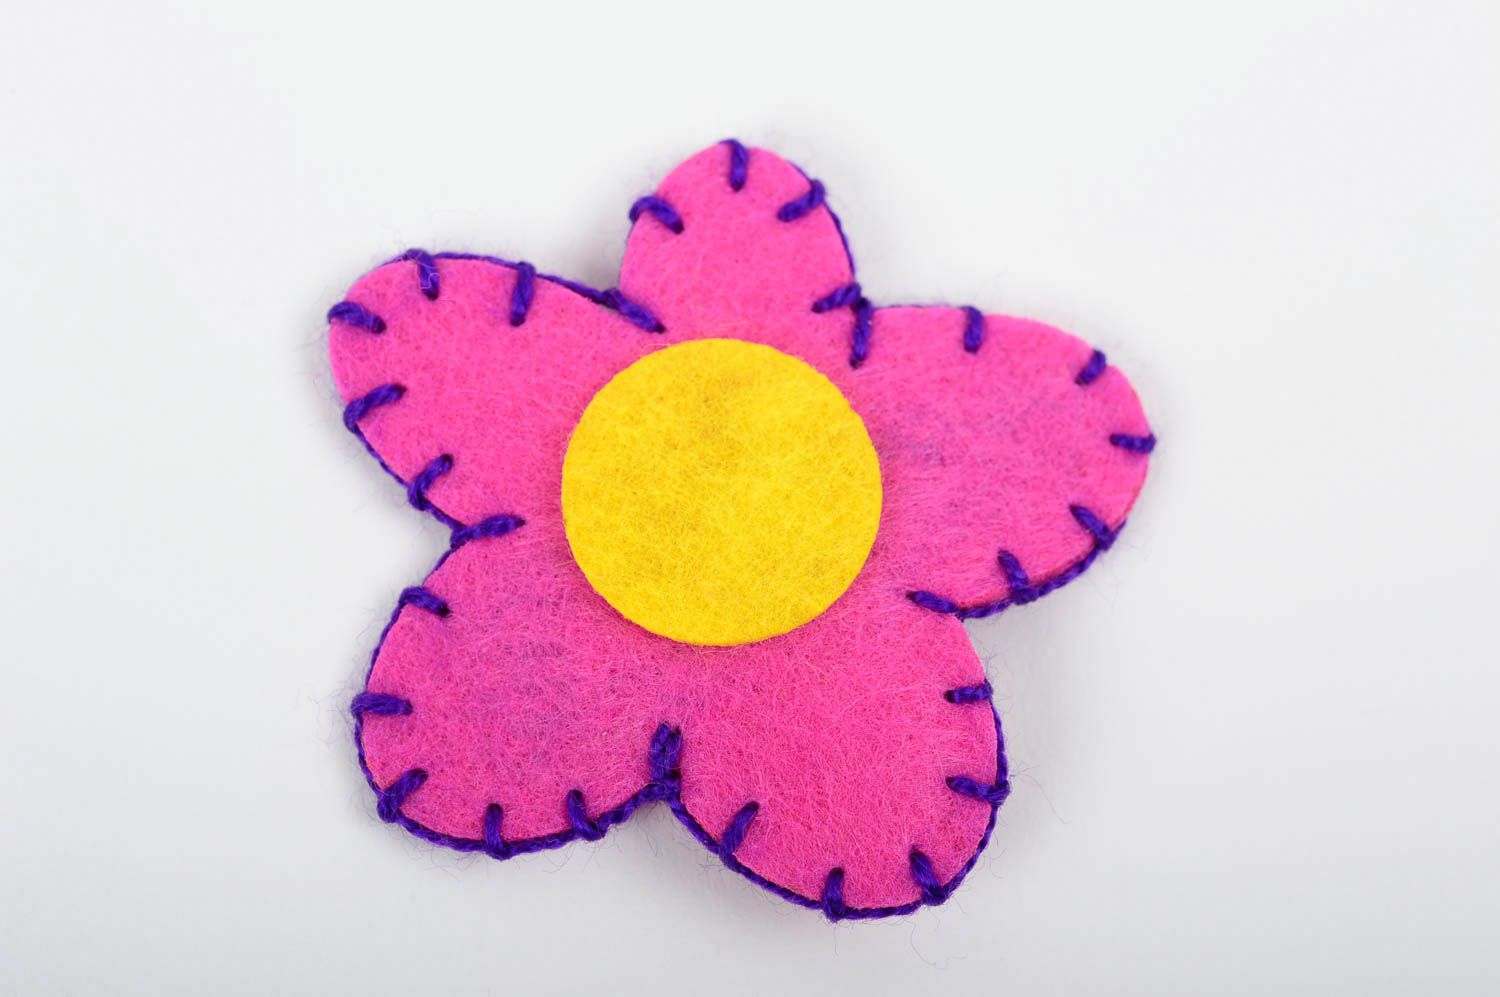 Handmade unique wool felted barrette designer hair accessory hairpin for girls photo 1